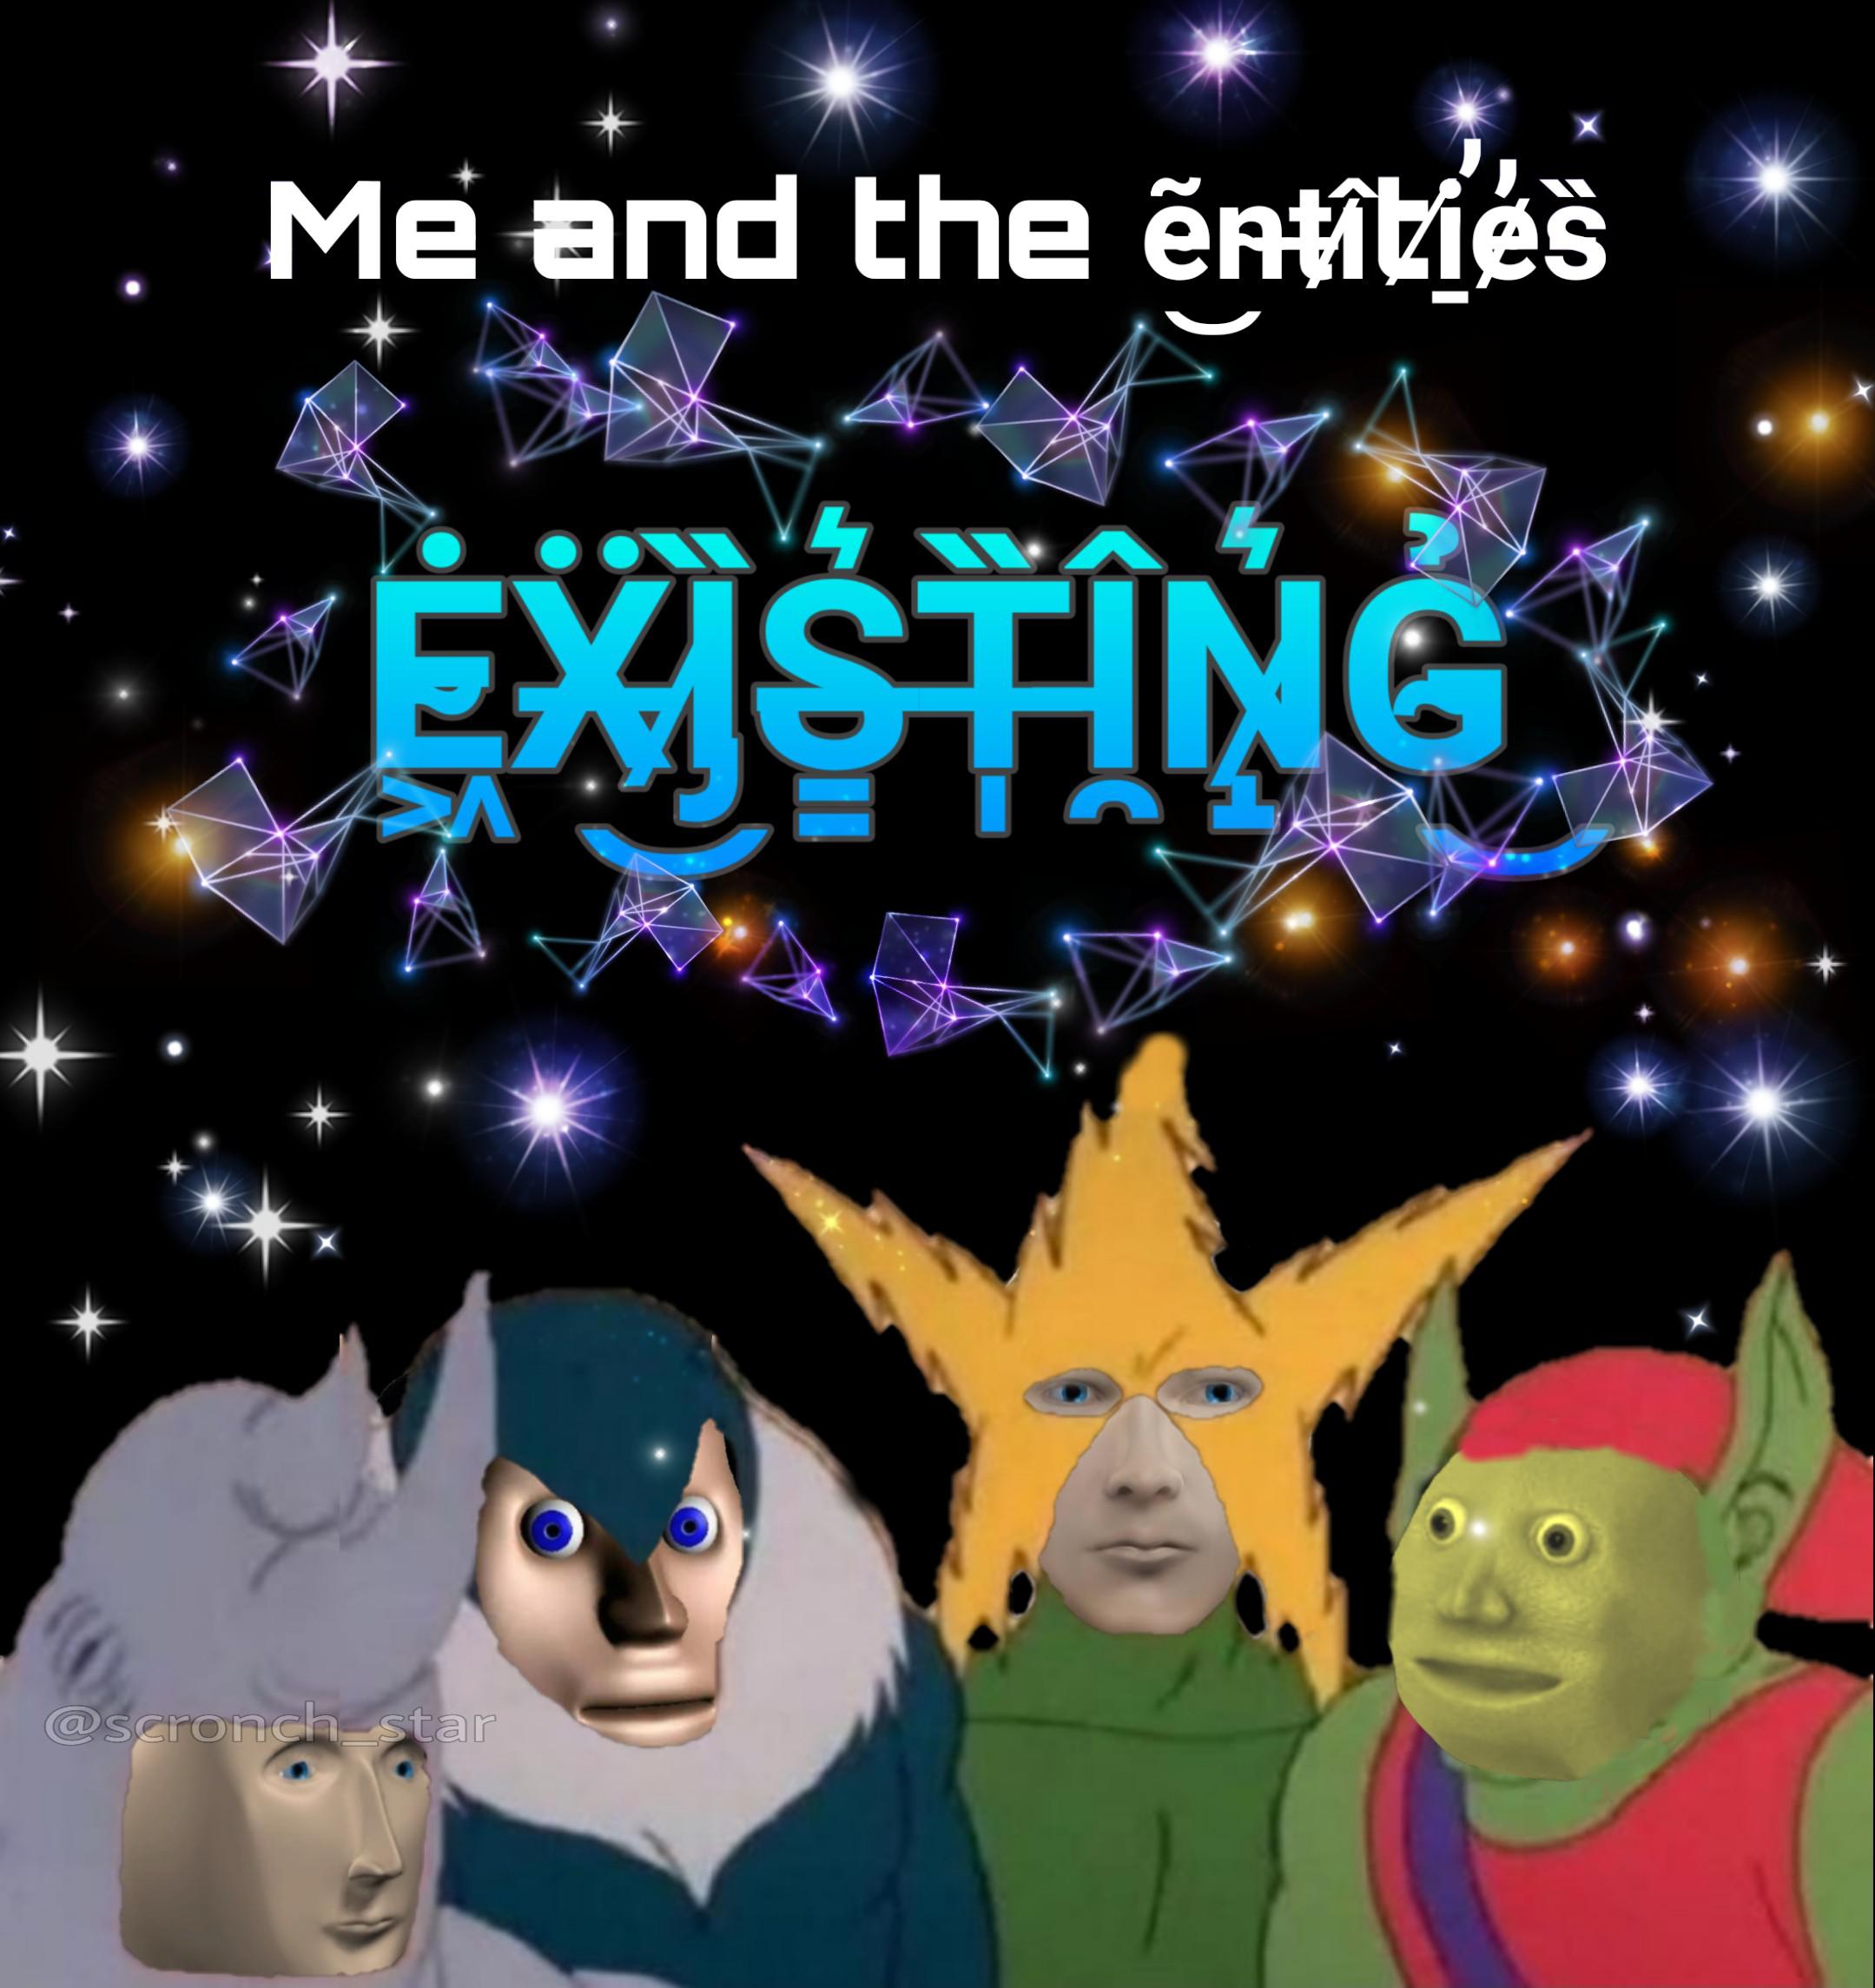 surreal memes - surreal memes - Me and the ntities Existin